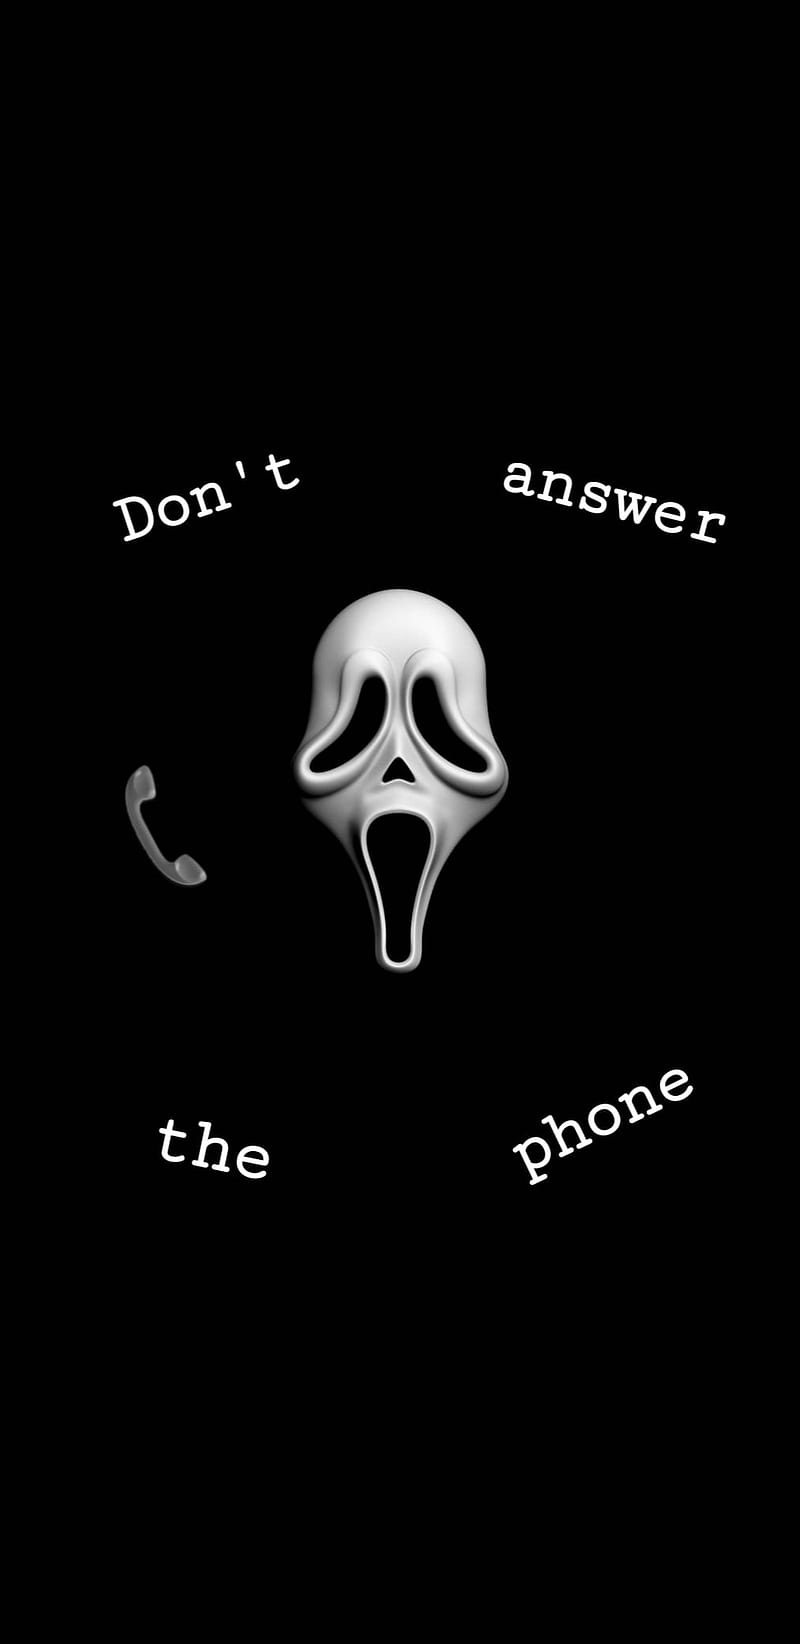 Background Scream Wallpaper Discover more American Character Developed  in 2023  Halloween wallpaper backgrounds Scary wallpaper Halloween wallpaper  iphone backgrounds